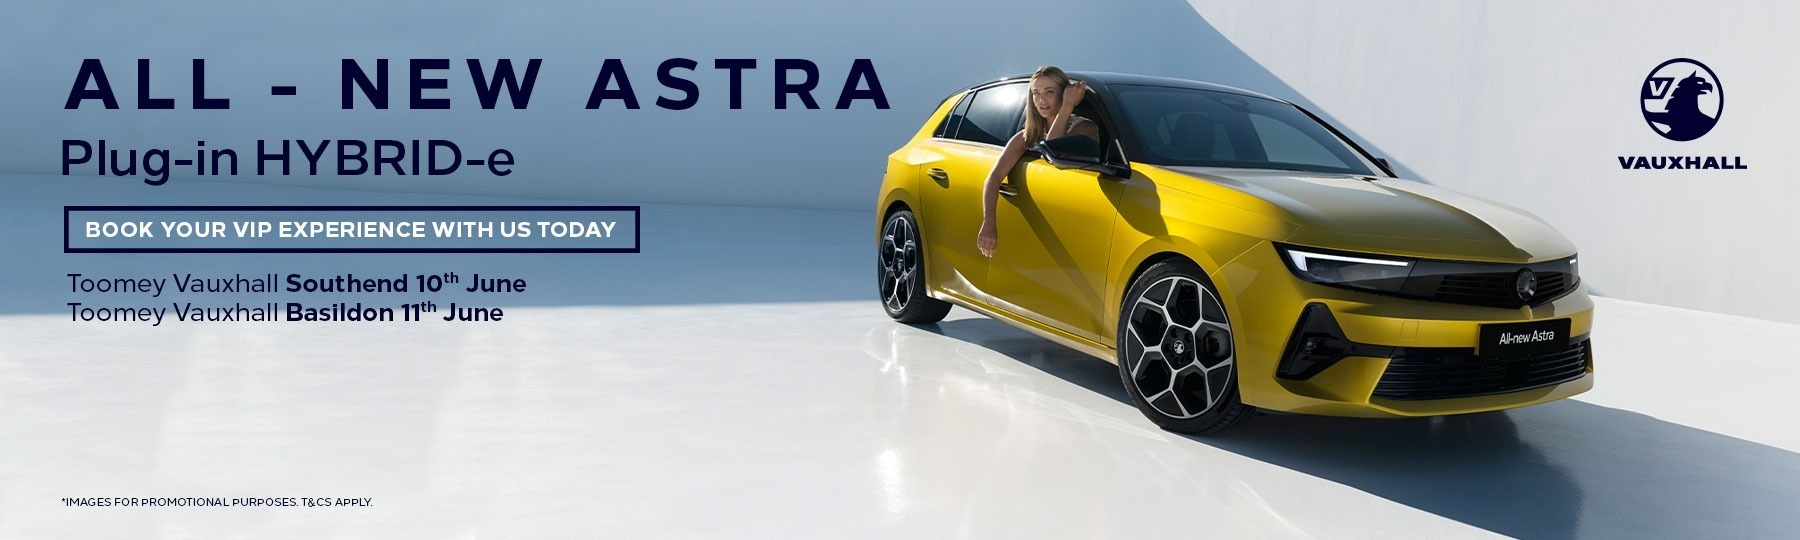 All-new Vauxhall Astra Event Offer